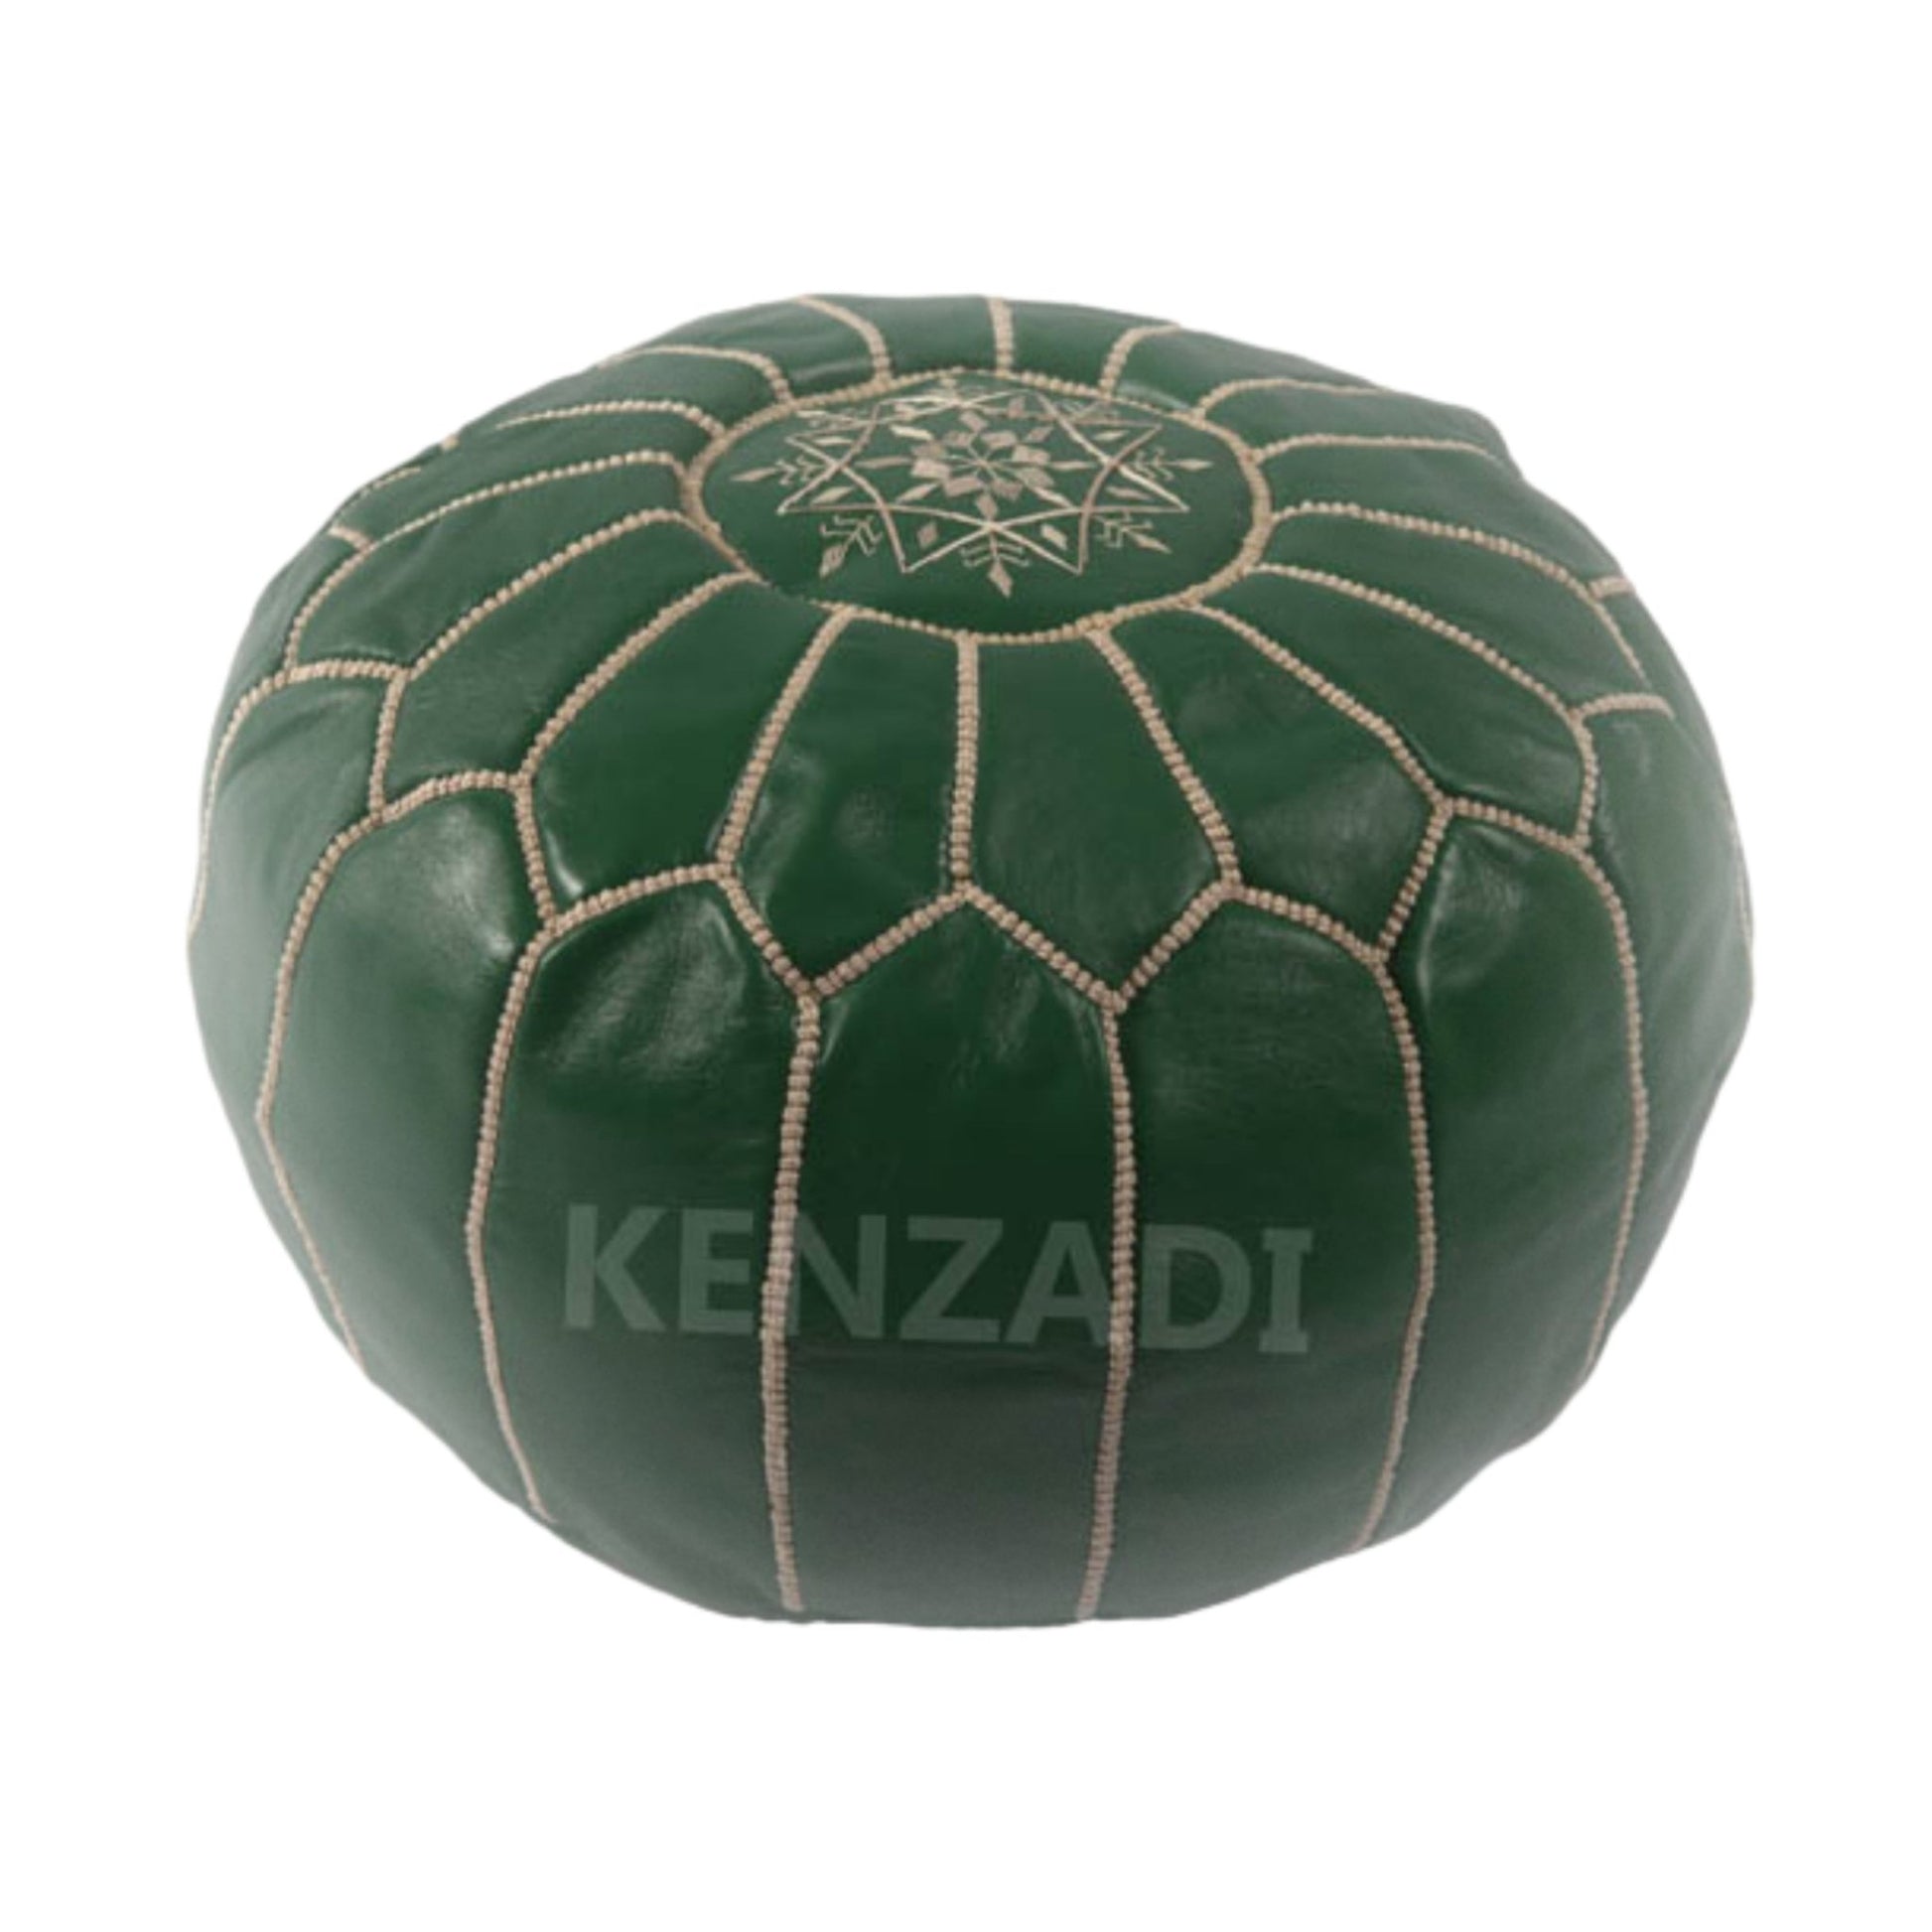 Moroccan leather pouf, round pouf, berber pouf, Dark Green pouf with Beige embroidery by Kenzadi - Handmade by My Poufs